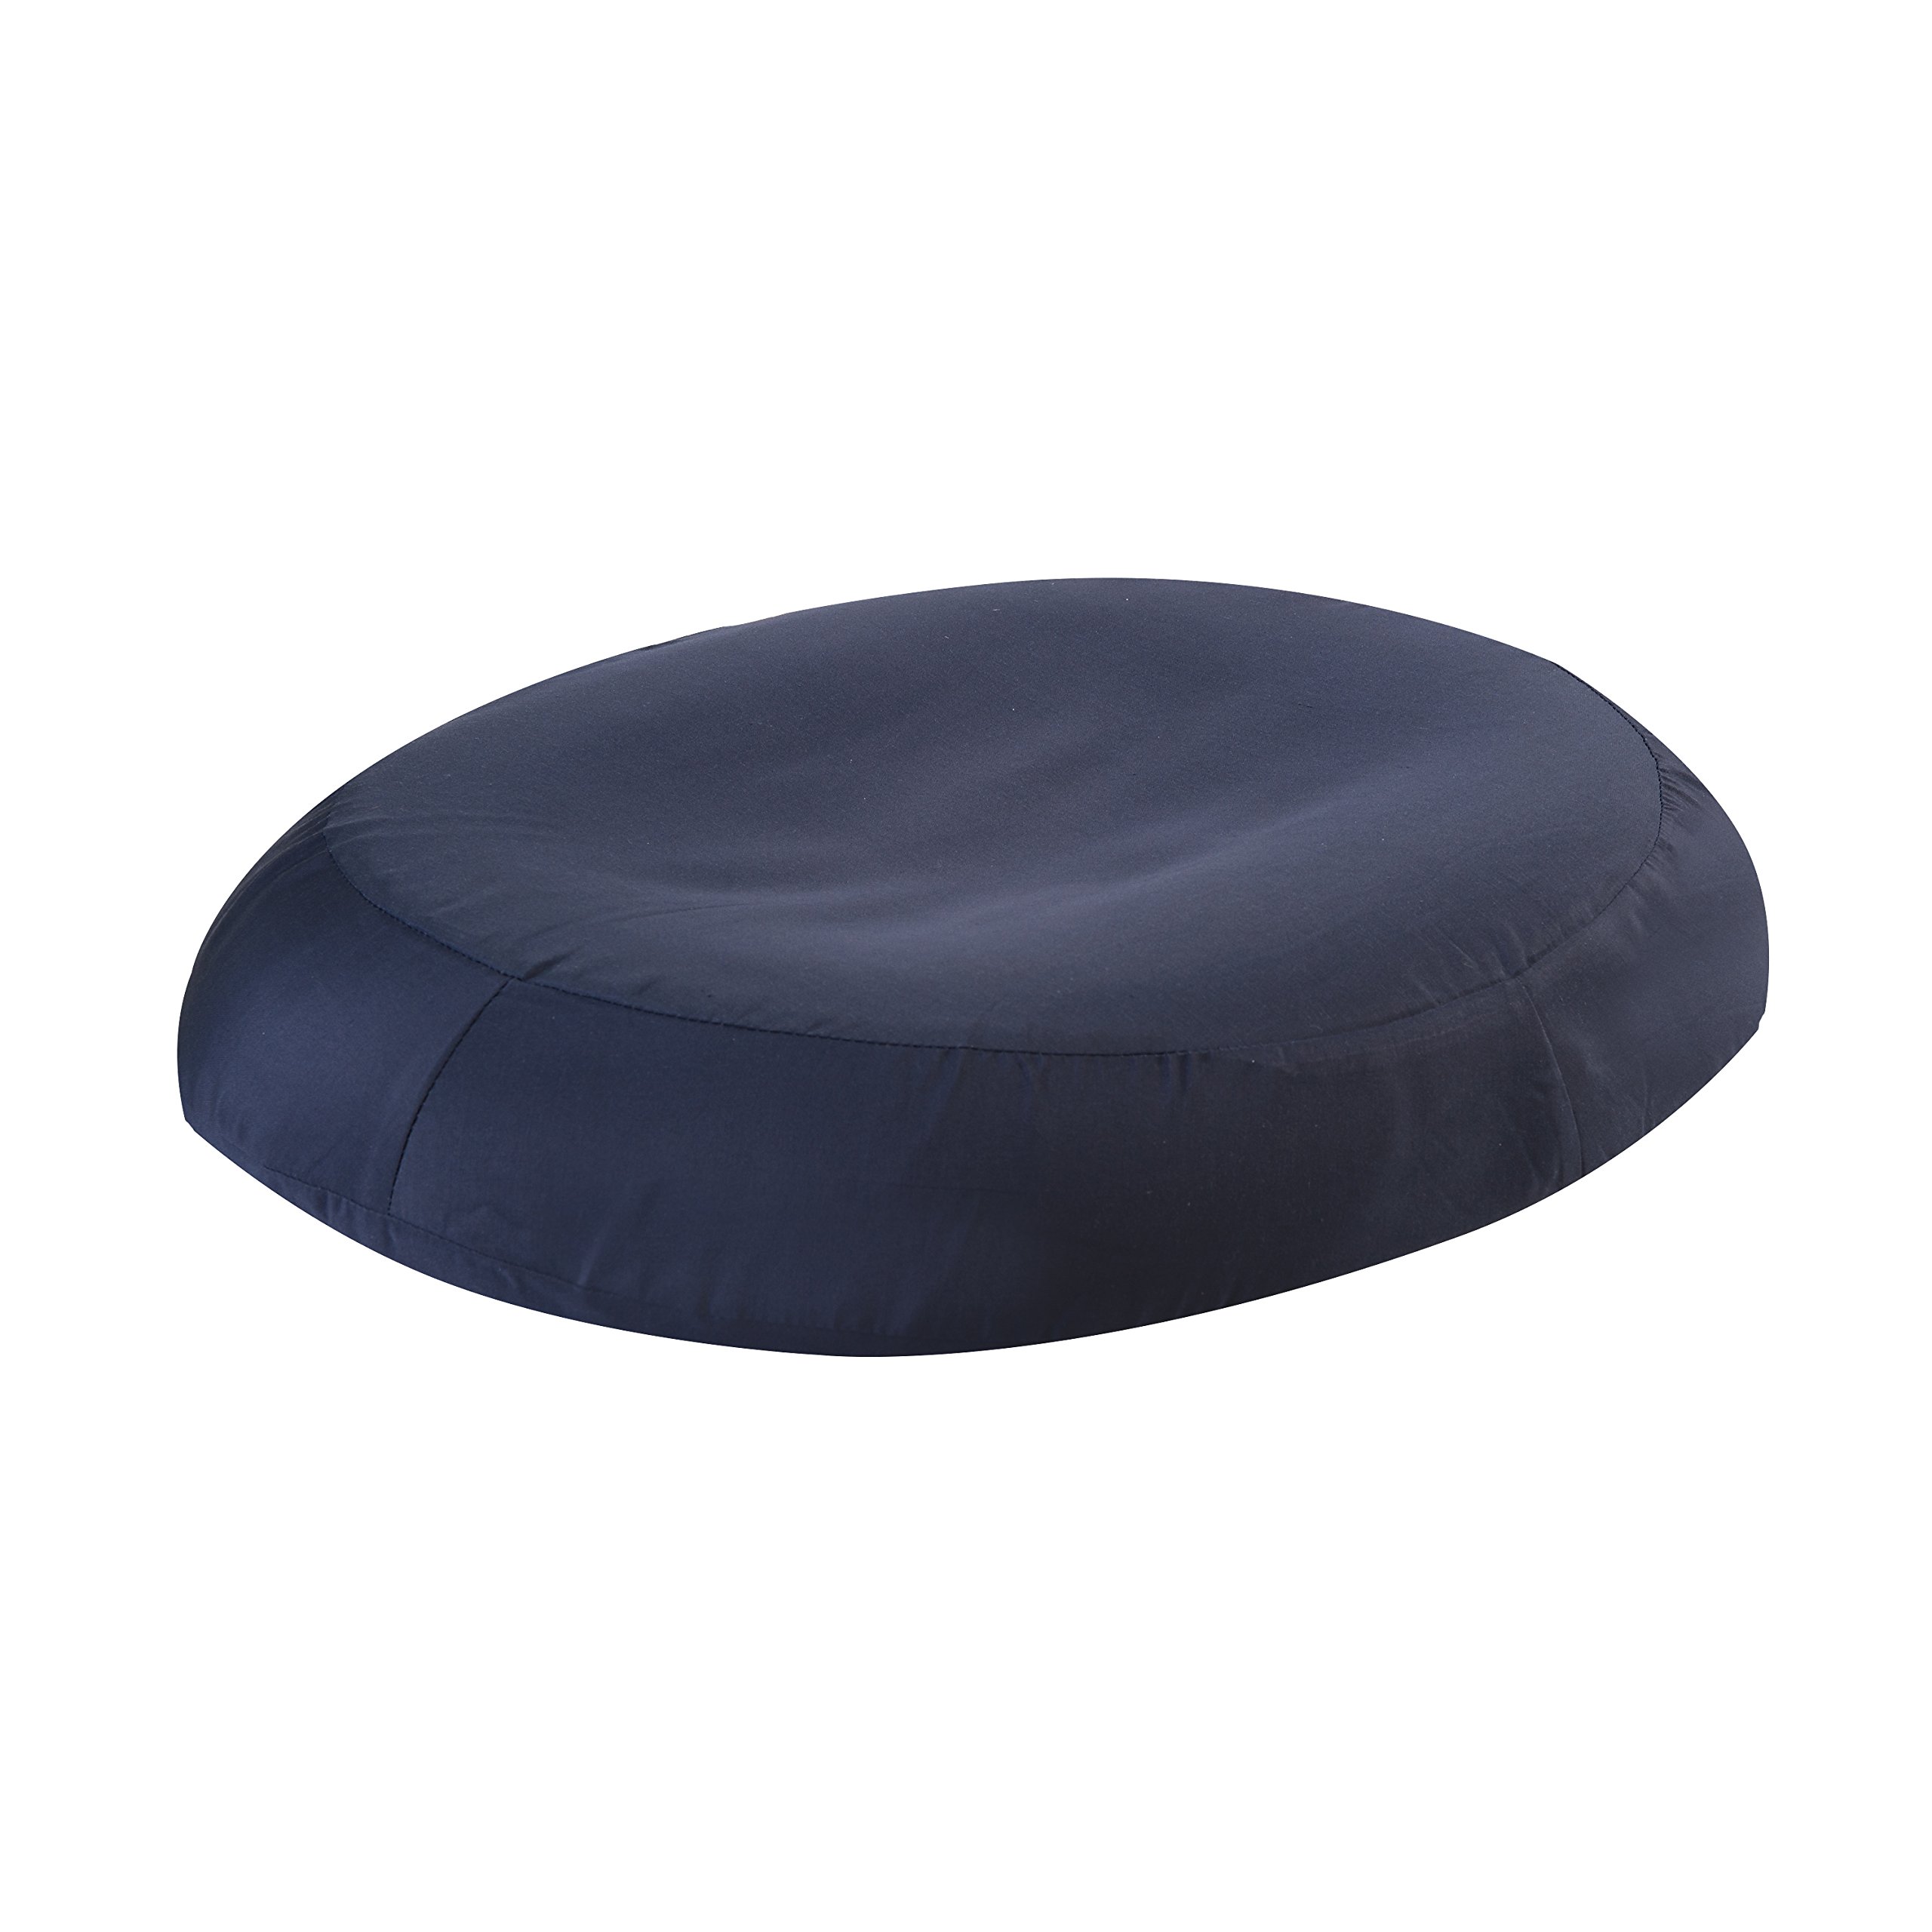 DMI Seat Cushion Donut Pillow and Chair Pillow for Tailbone Pain Relief, Hemorrhoids, Prostate, Pregnancy, Post Natal, Pressure Relief and Surgery, 18 x 15 x 3, Navy